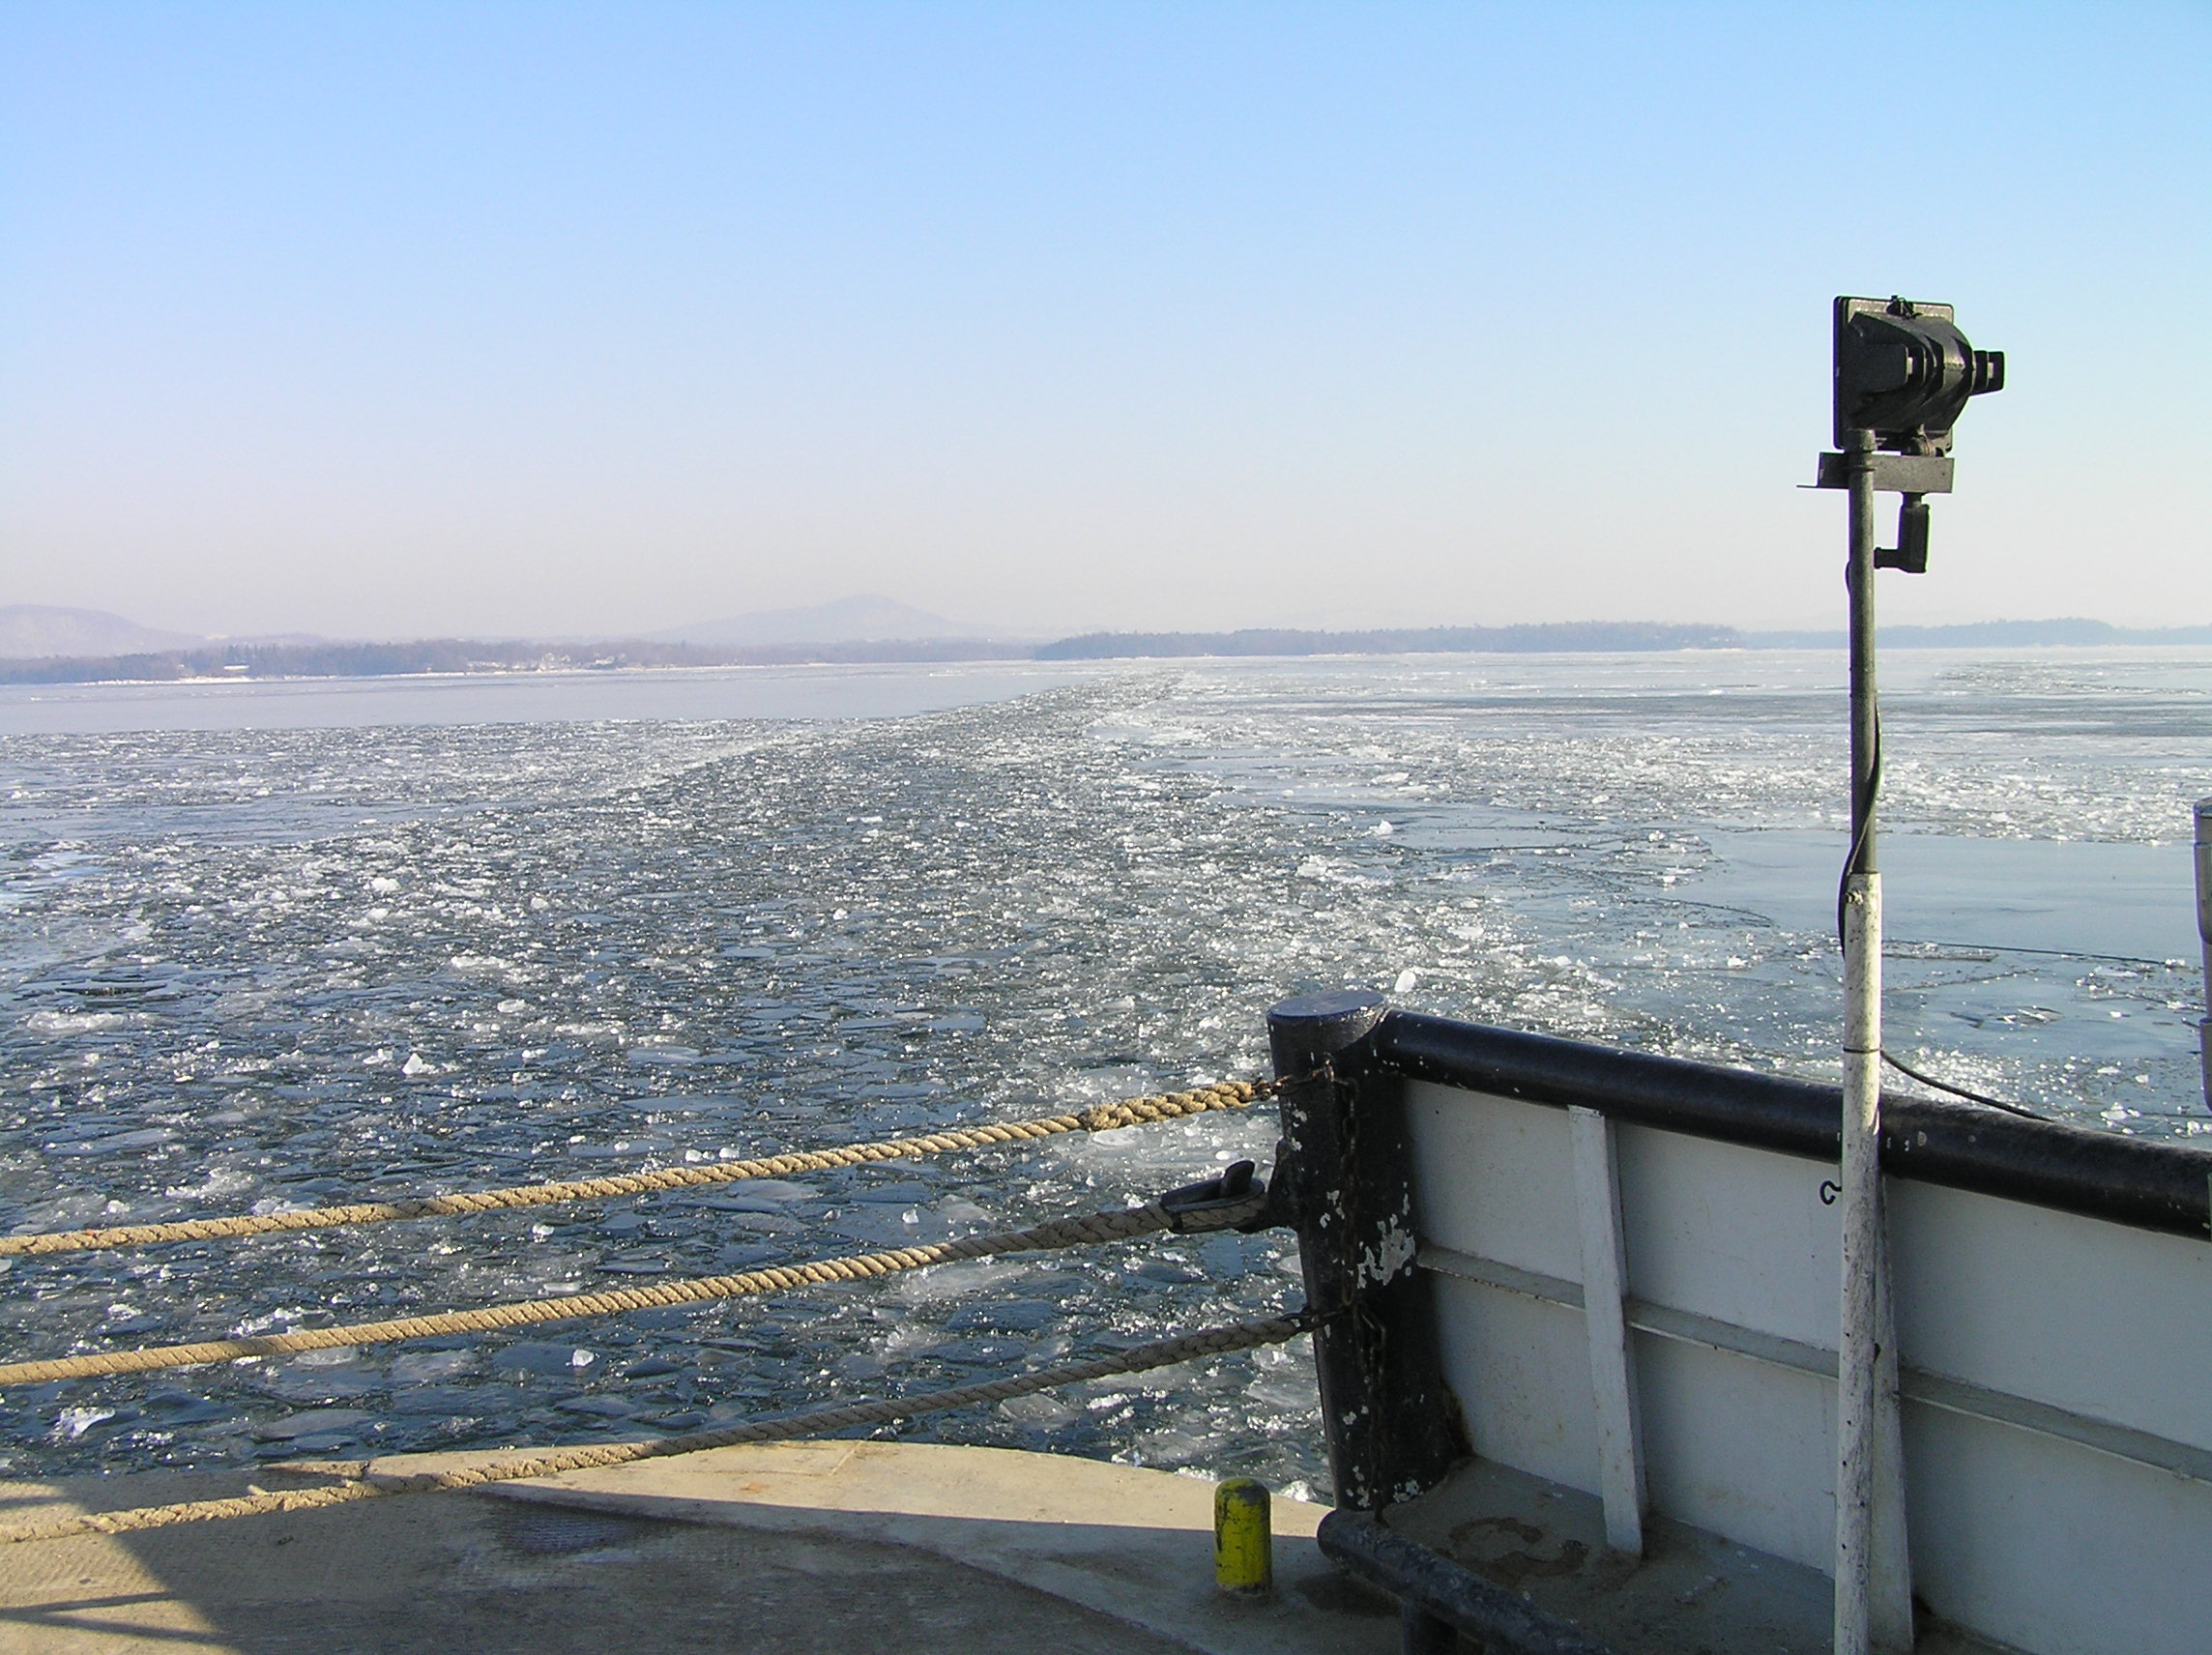 Lake Champlain, which was included in this study, has experienced long-term increasing chloride concentrations. Photo by T444vt